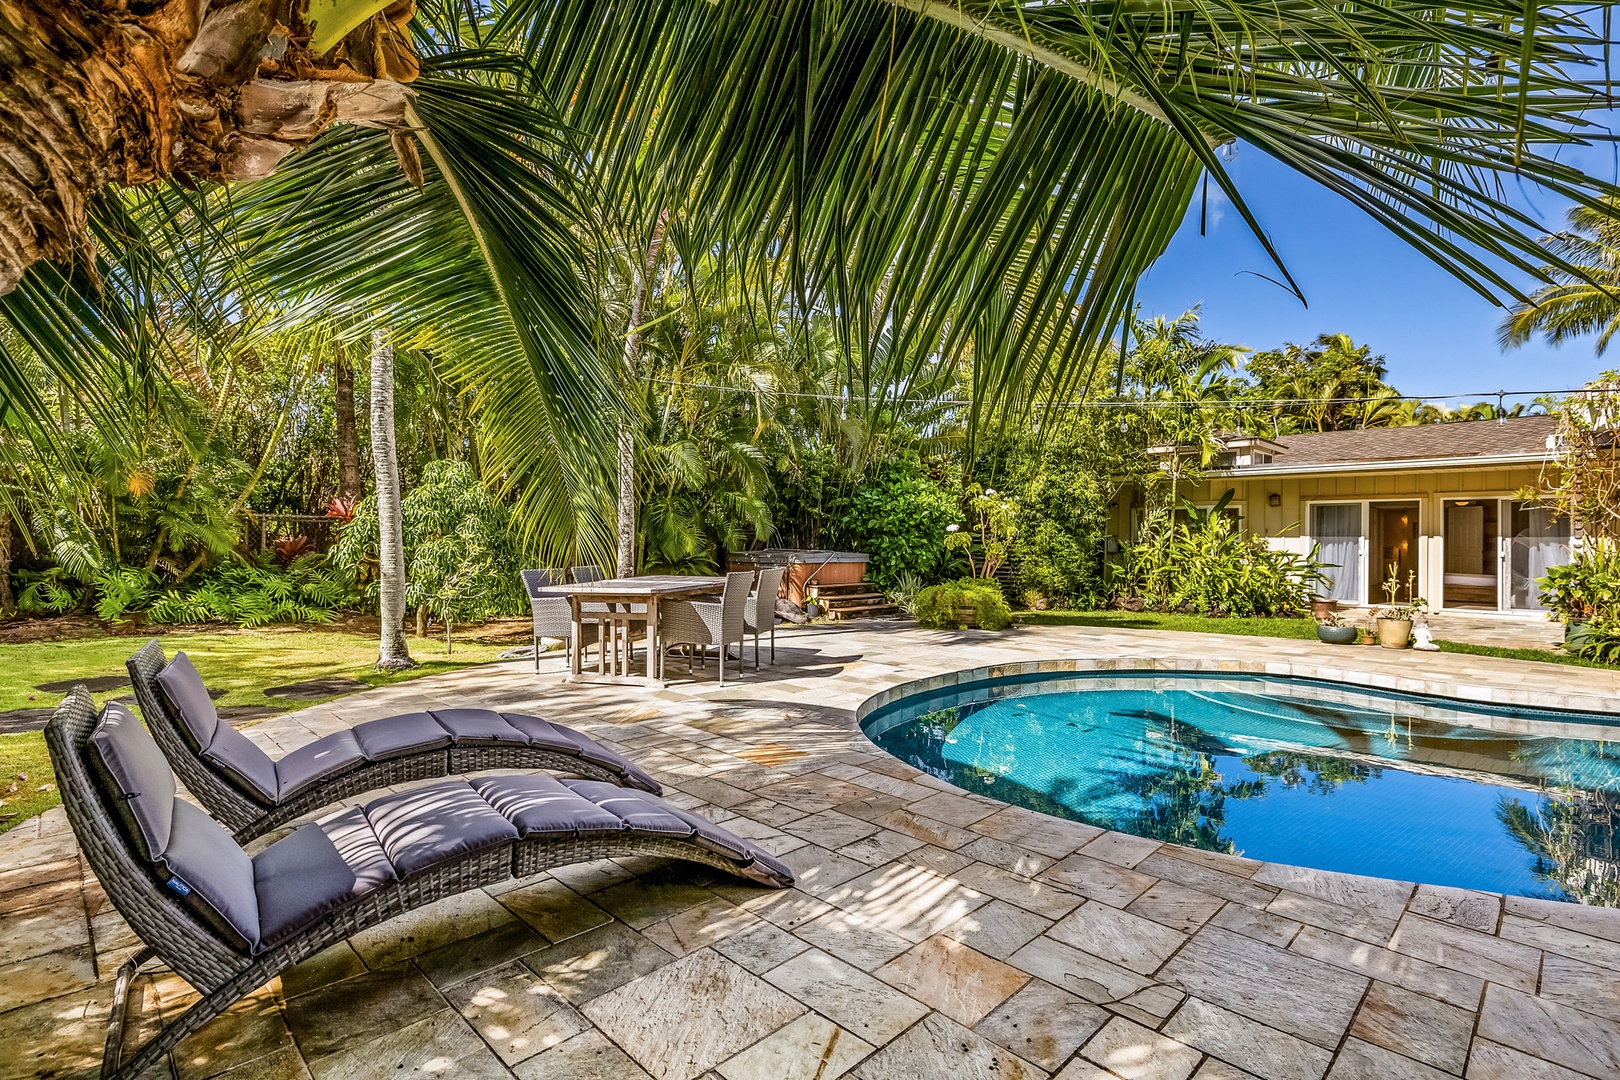 Honolulu Vacation Rentals, Hale Ho'omaha - Lounge on the patio or relax in the private hot tub